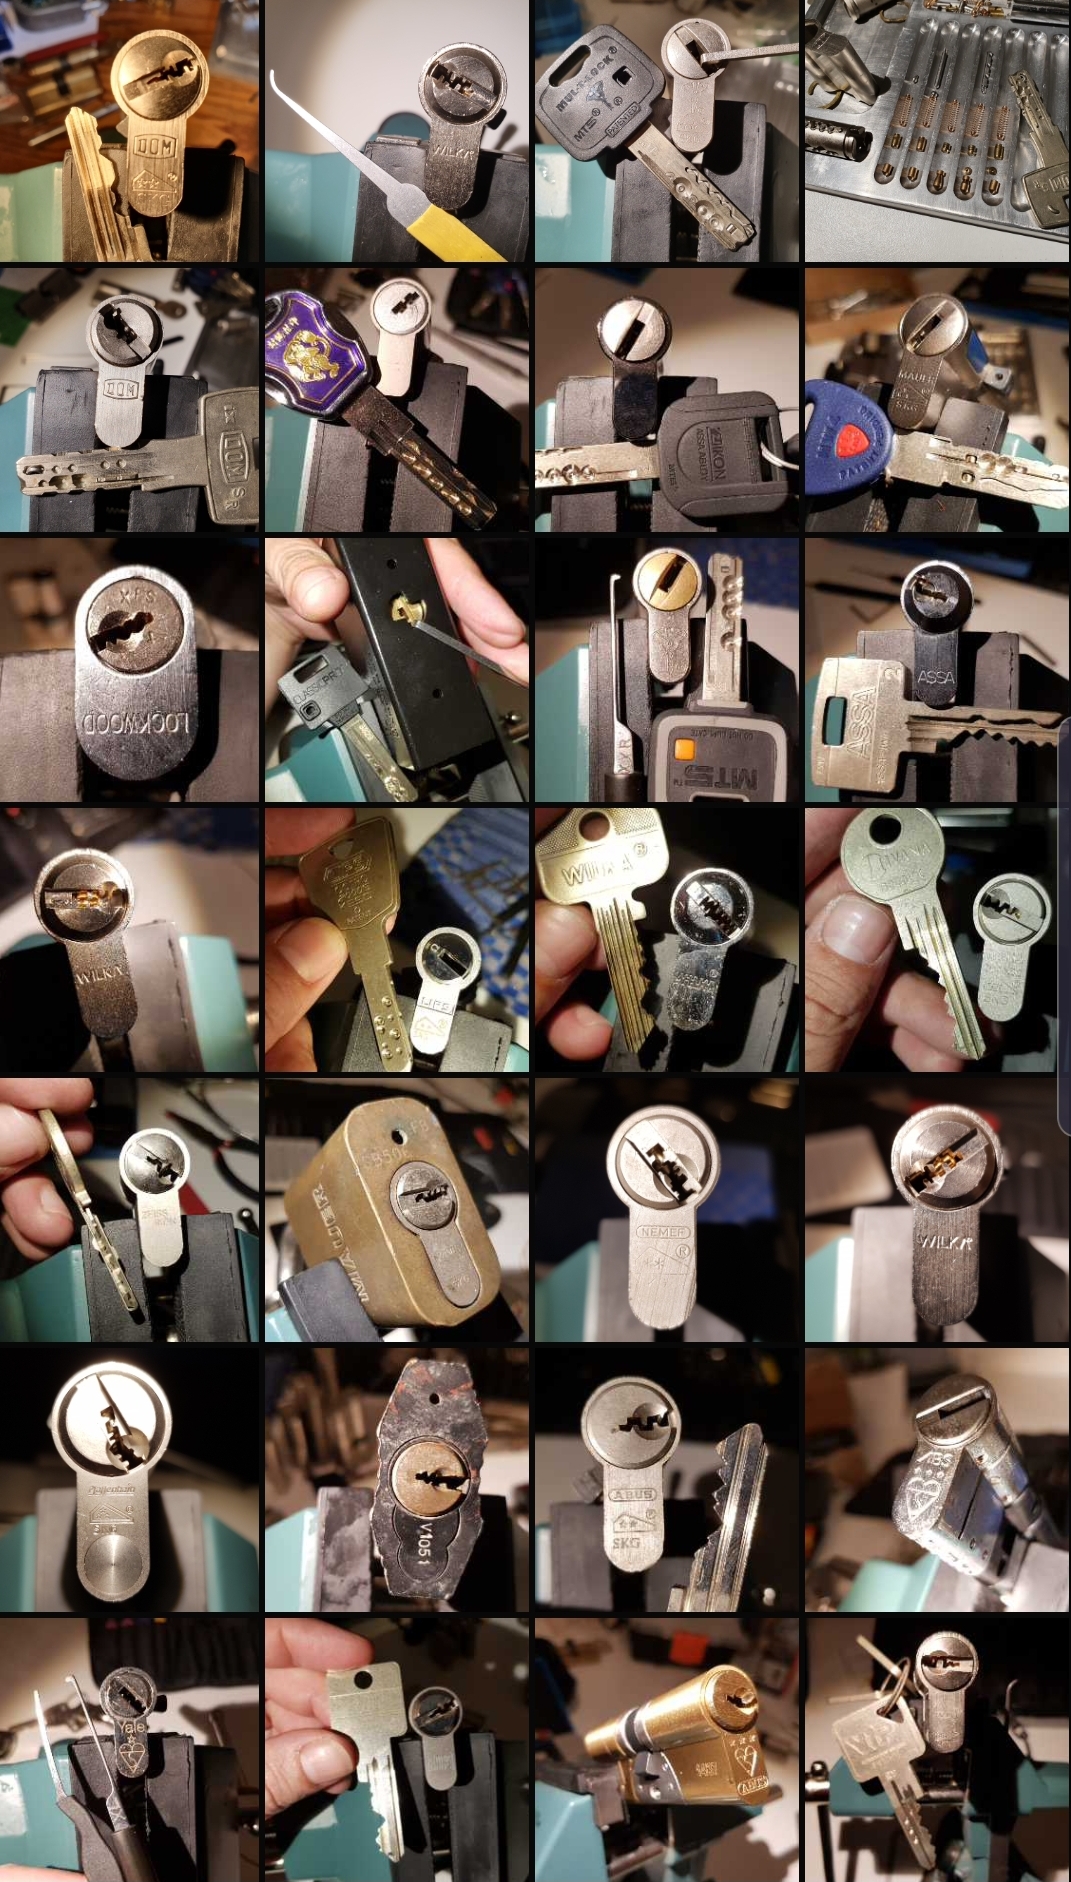 Thought you guys might be interested in a test project I did. I 3D printed  a bump key, then duplicated it in metal at an automated minute key kiosk. :  r/lockpicking